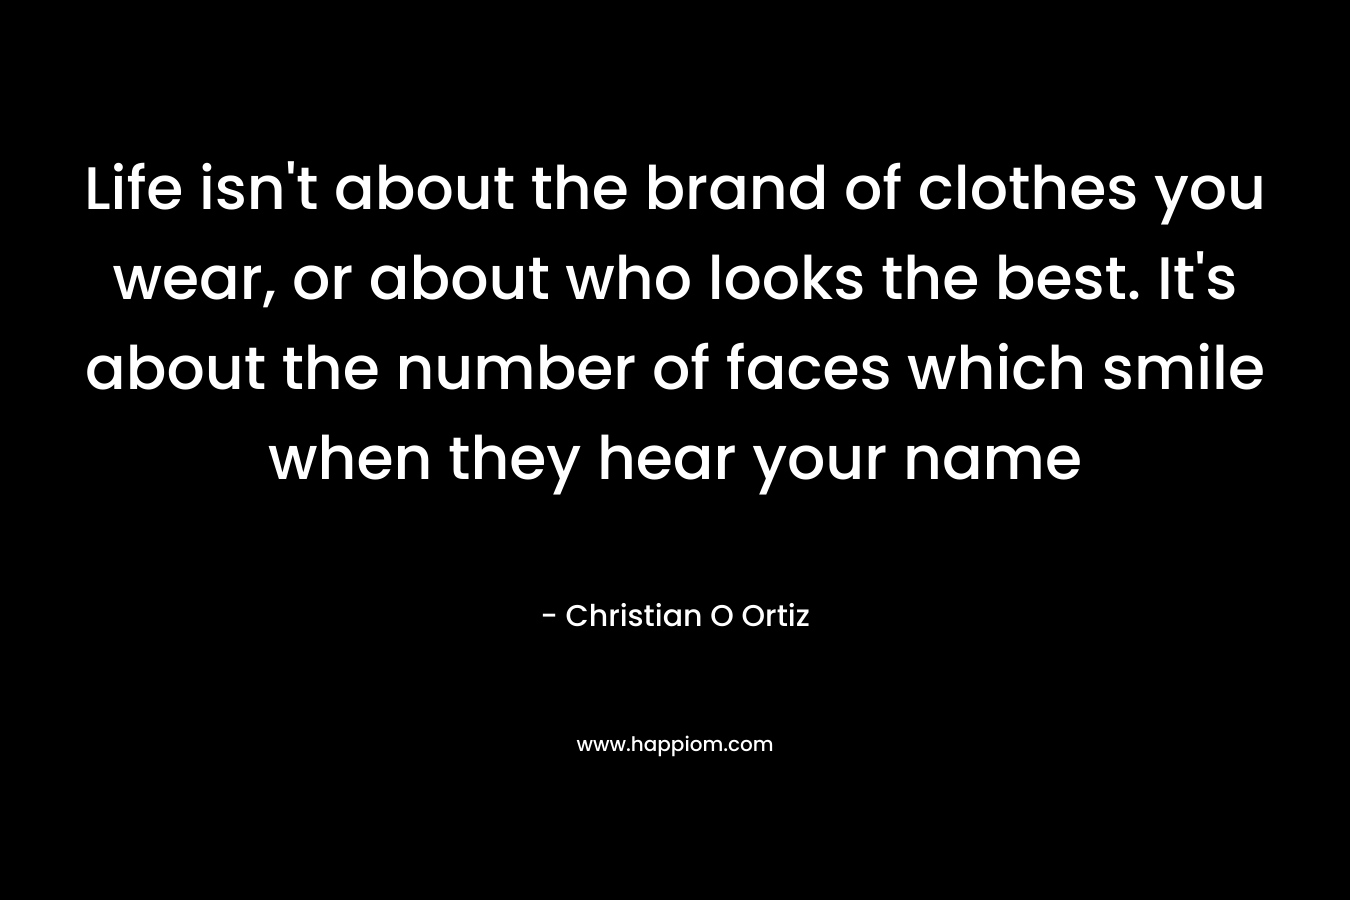 Life isn’t about the brand of clothes you wear, or about who looks the best. It’s about the number of faces which smile when they hear your name – Christian O Ortiz